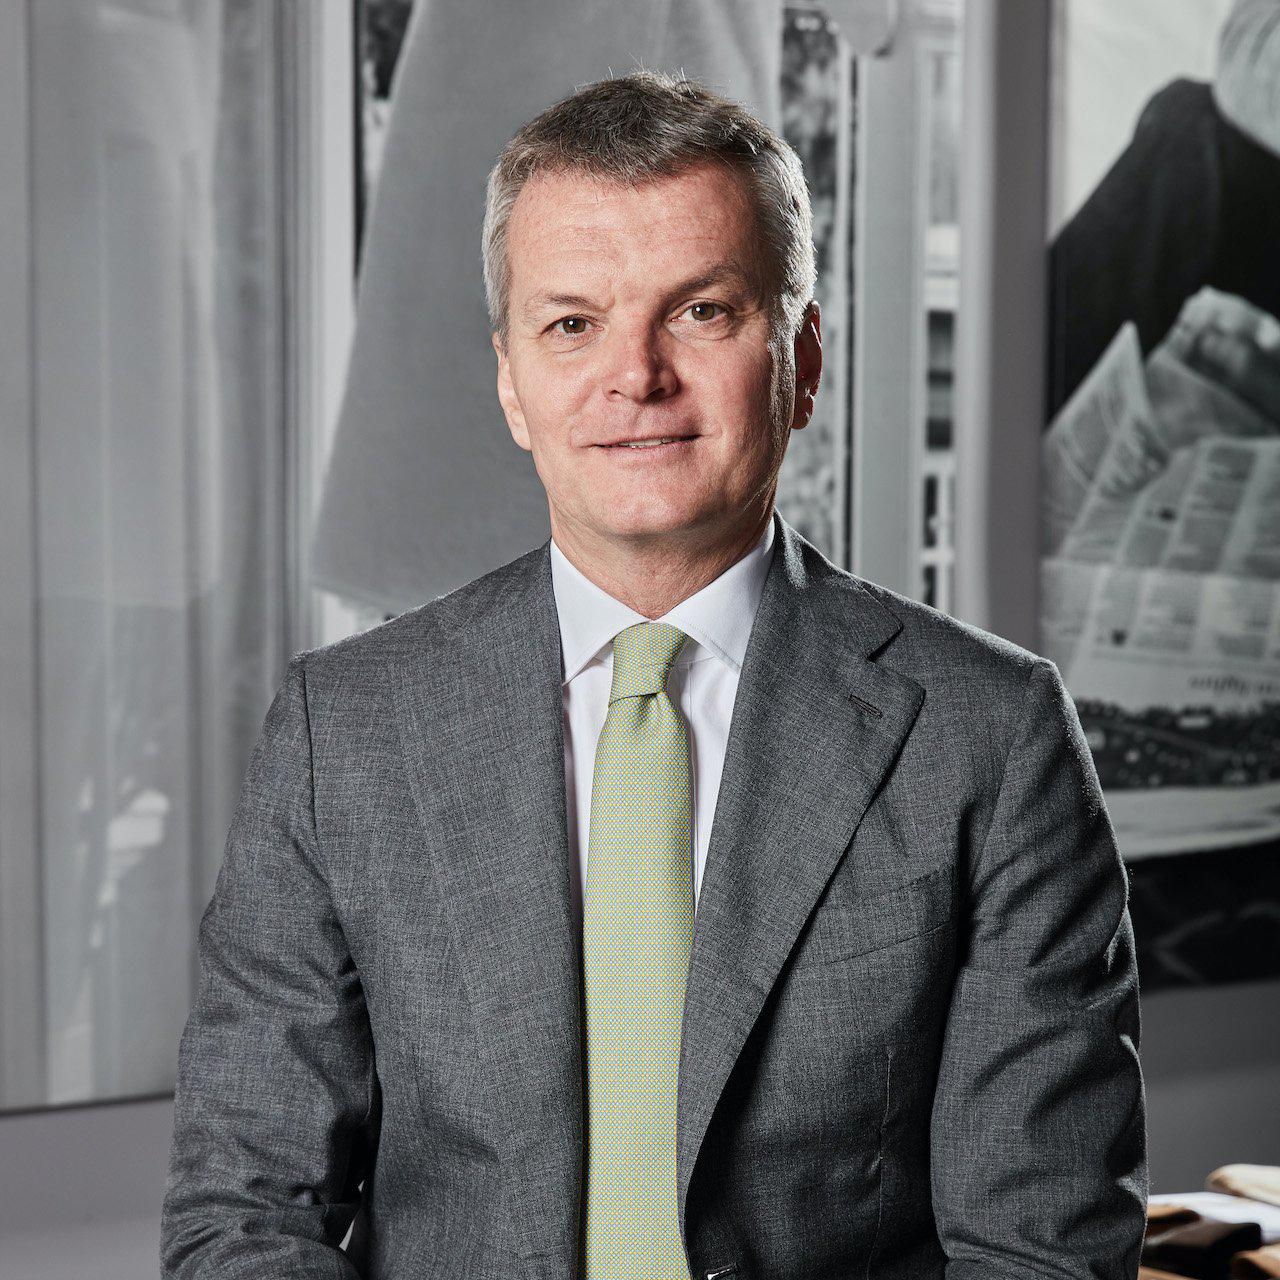 Interview with Filippo Arnaboldi CEO of Frette